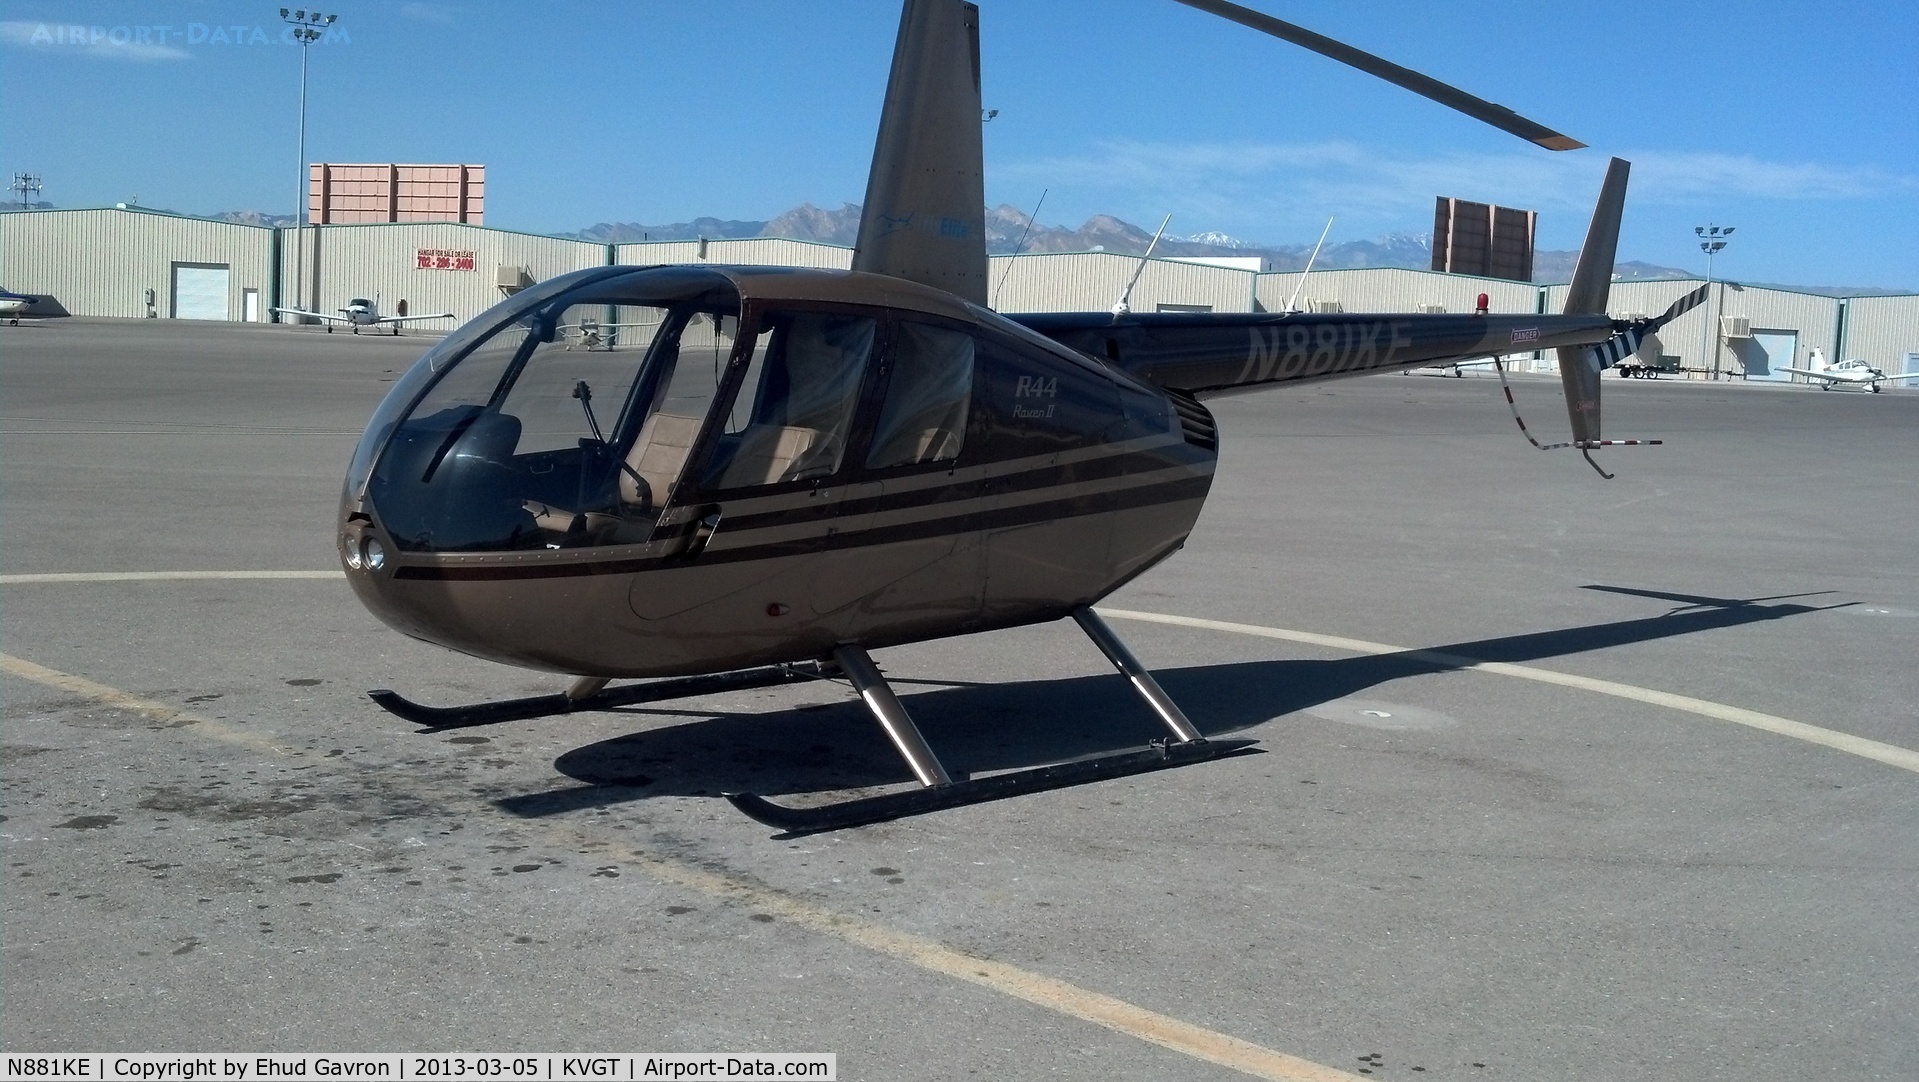 N881KE, 2002 Robinson R44 II C/N 10031, Parked at North Las Vegas airport, the helicopter I did most of my early training in :)